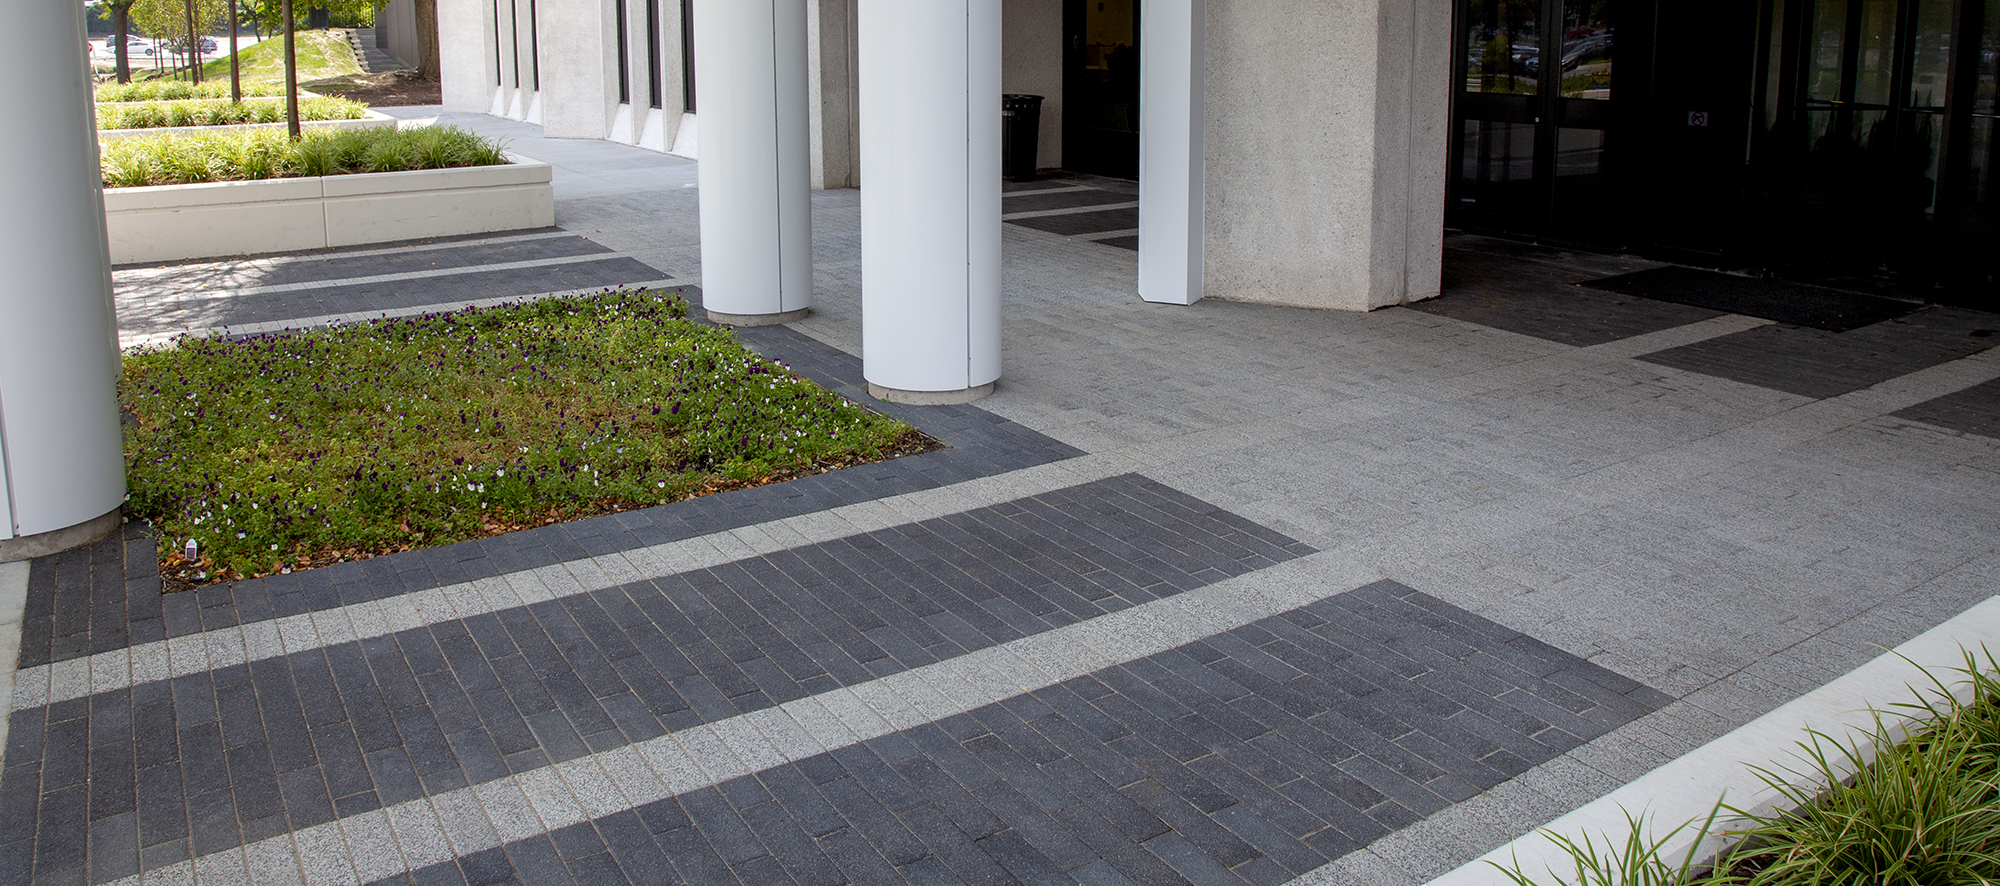 Two-toned Promenade Plank pavers define distinct walkways leading to and from the Continental Towers in Chicago.